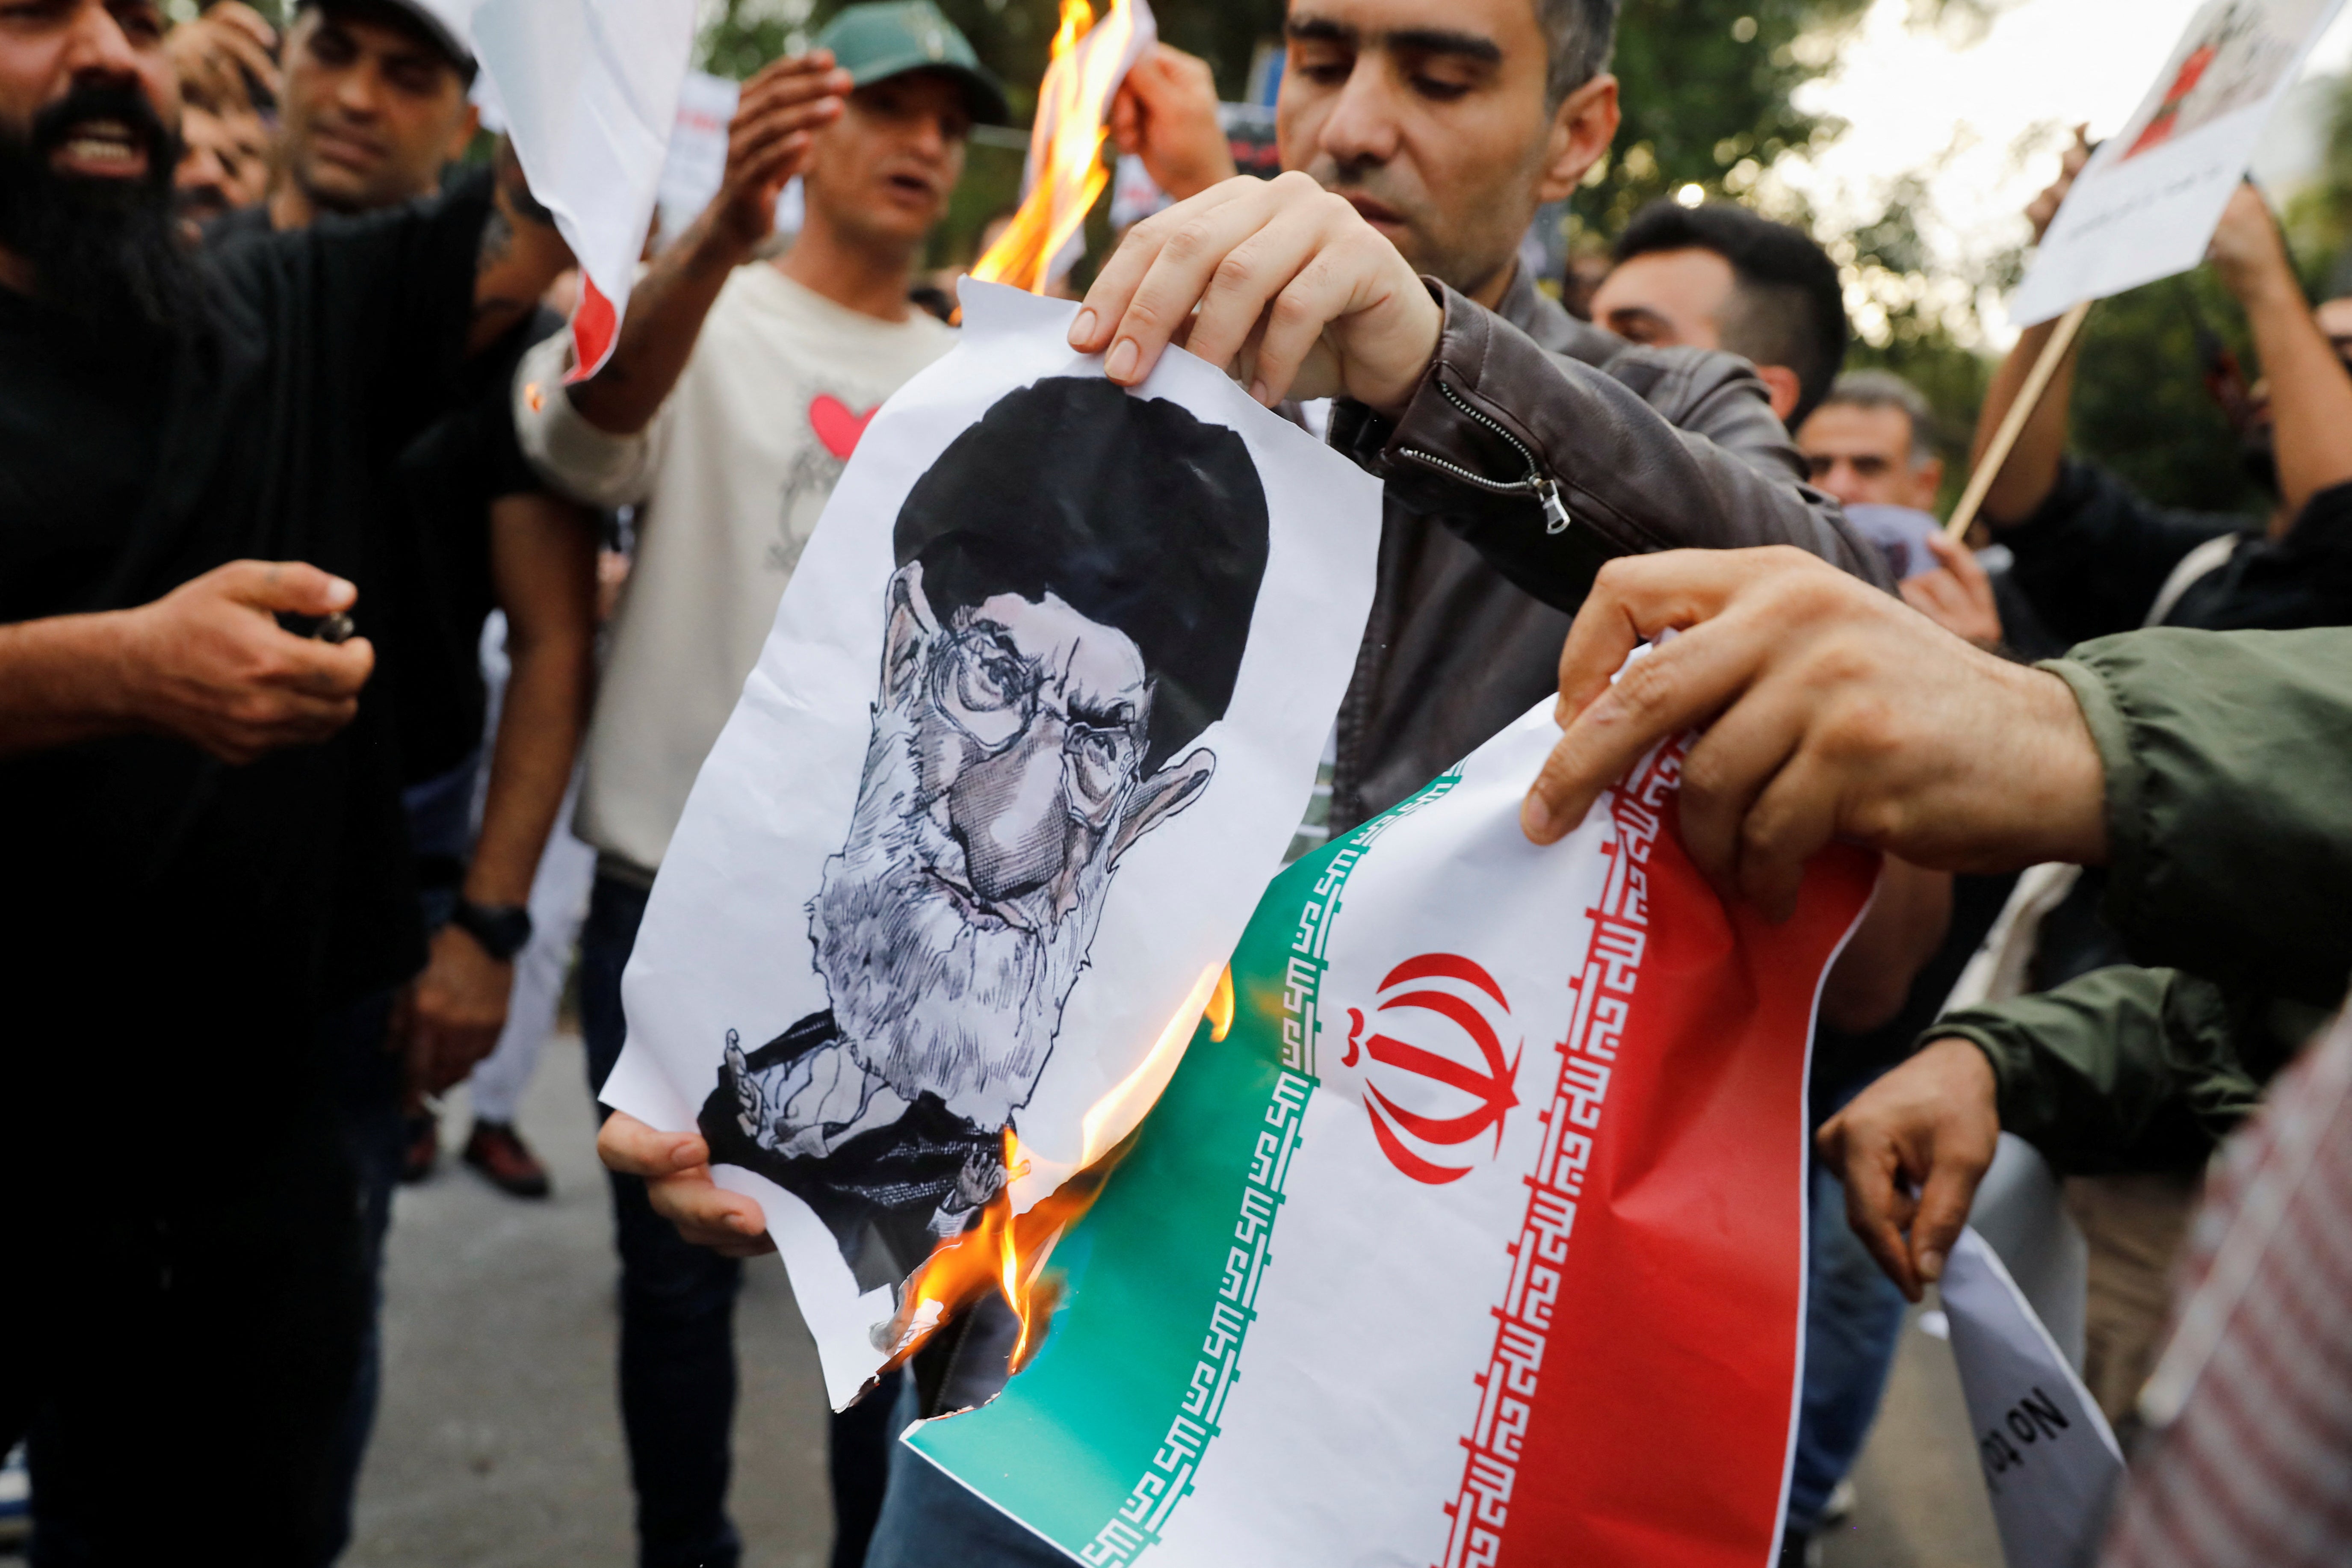 For weeks, protesters have been regularly trashing Khamenei’s portraits and calling for his ousting and death at ongoing rallies